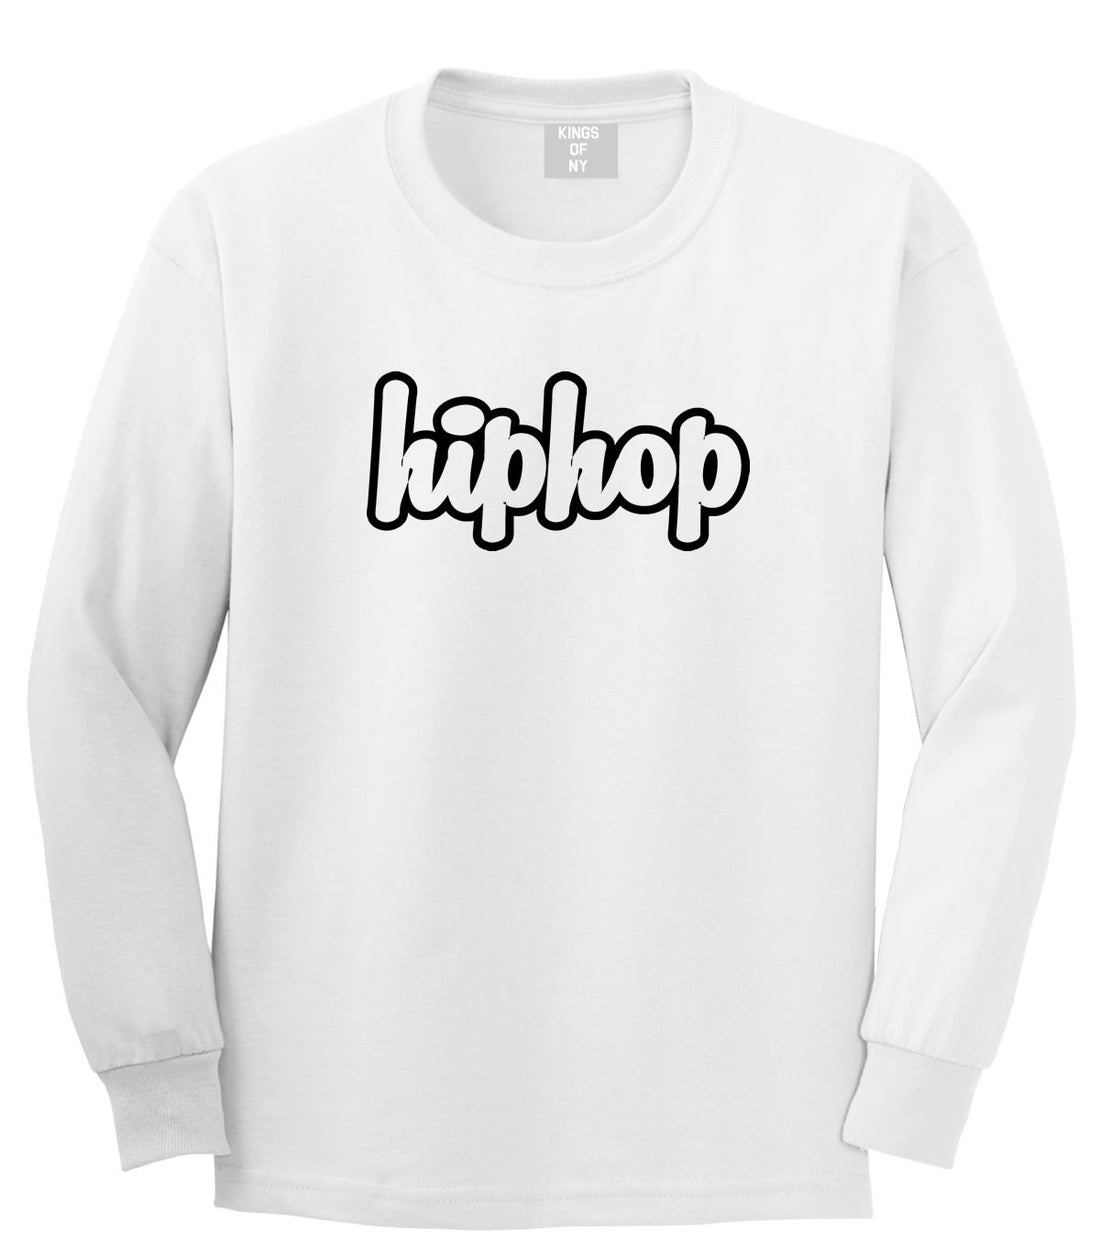 Hiphop Outline Old School Long Sleeve T-Shirt in White By Kings Of NY